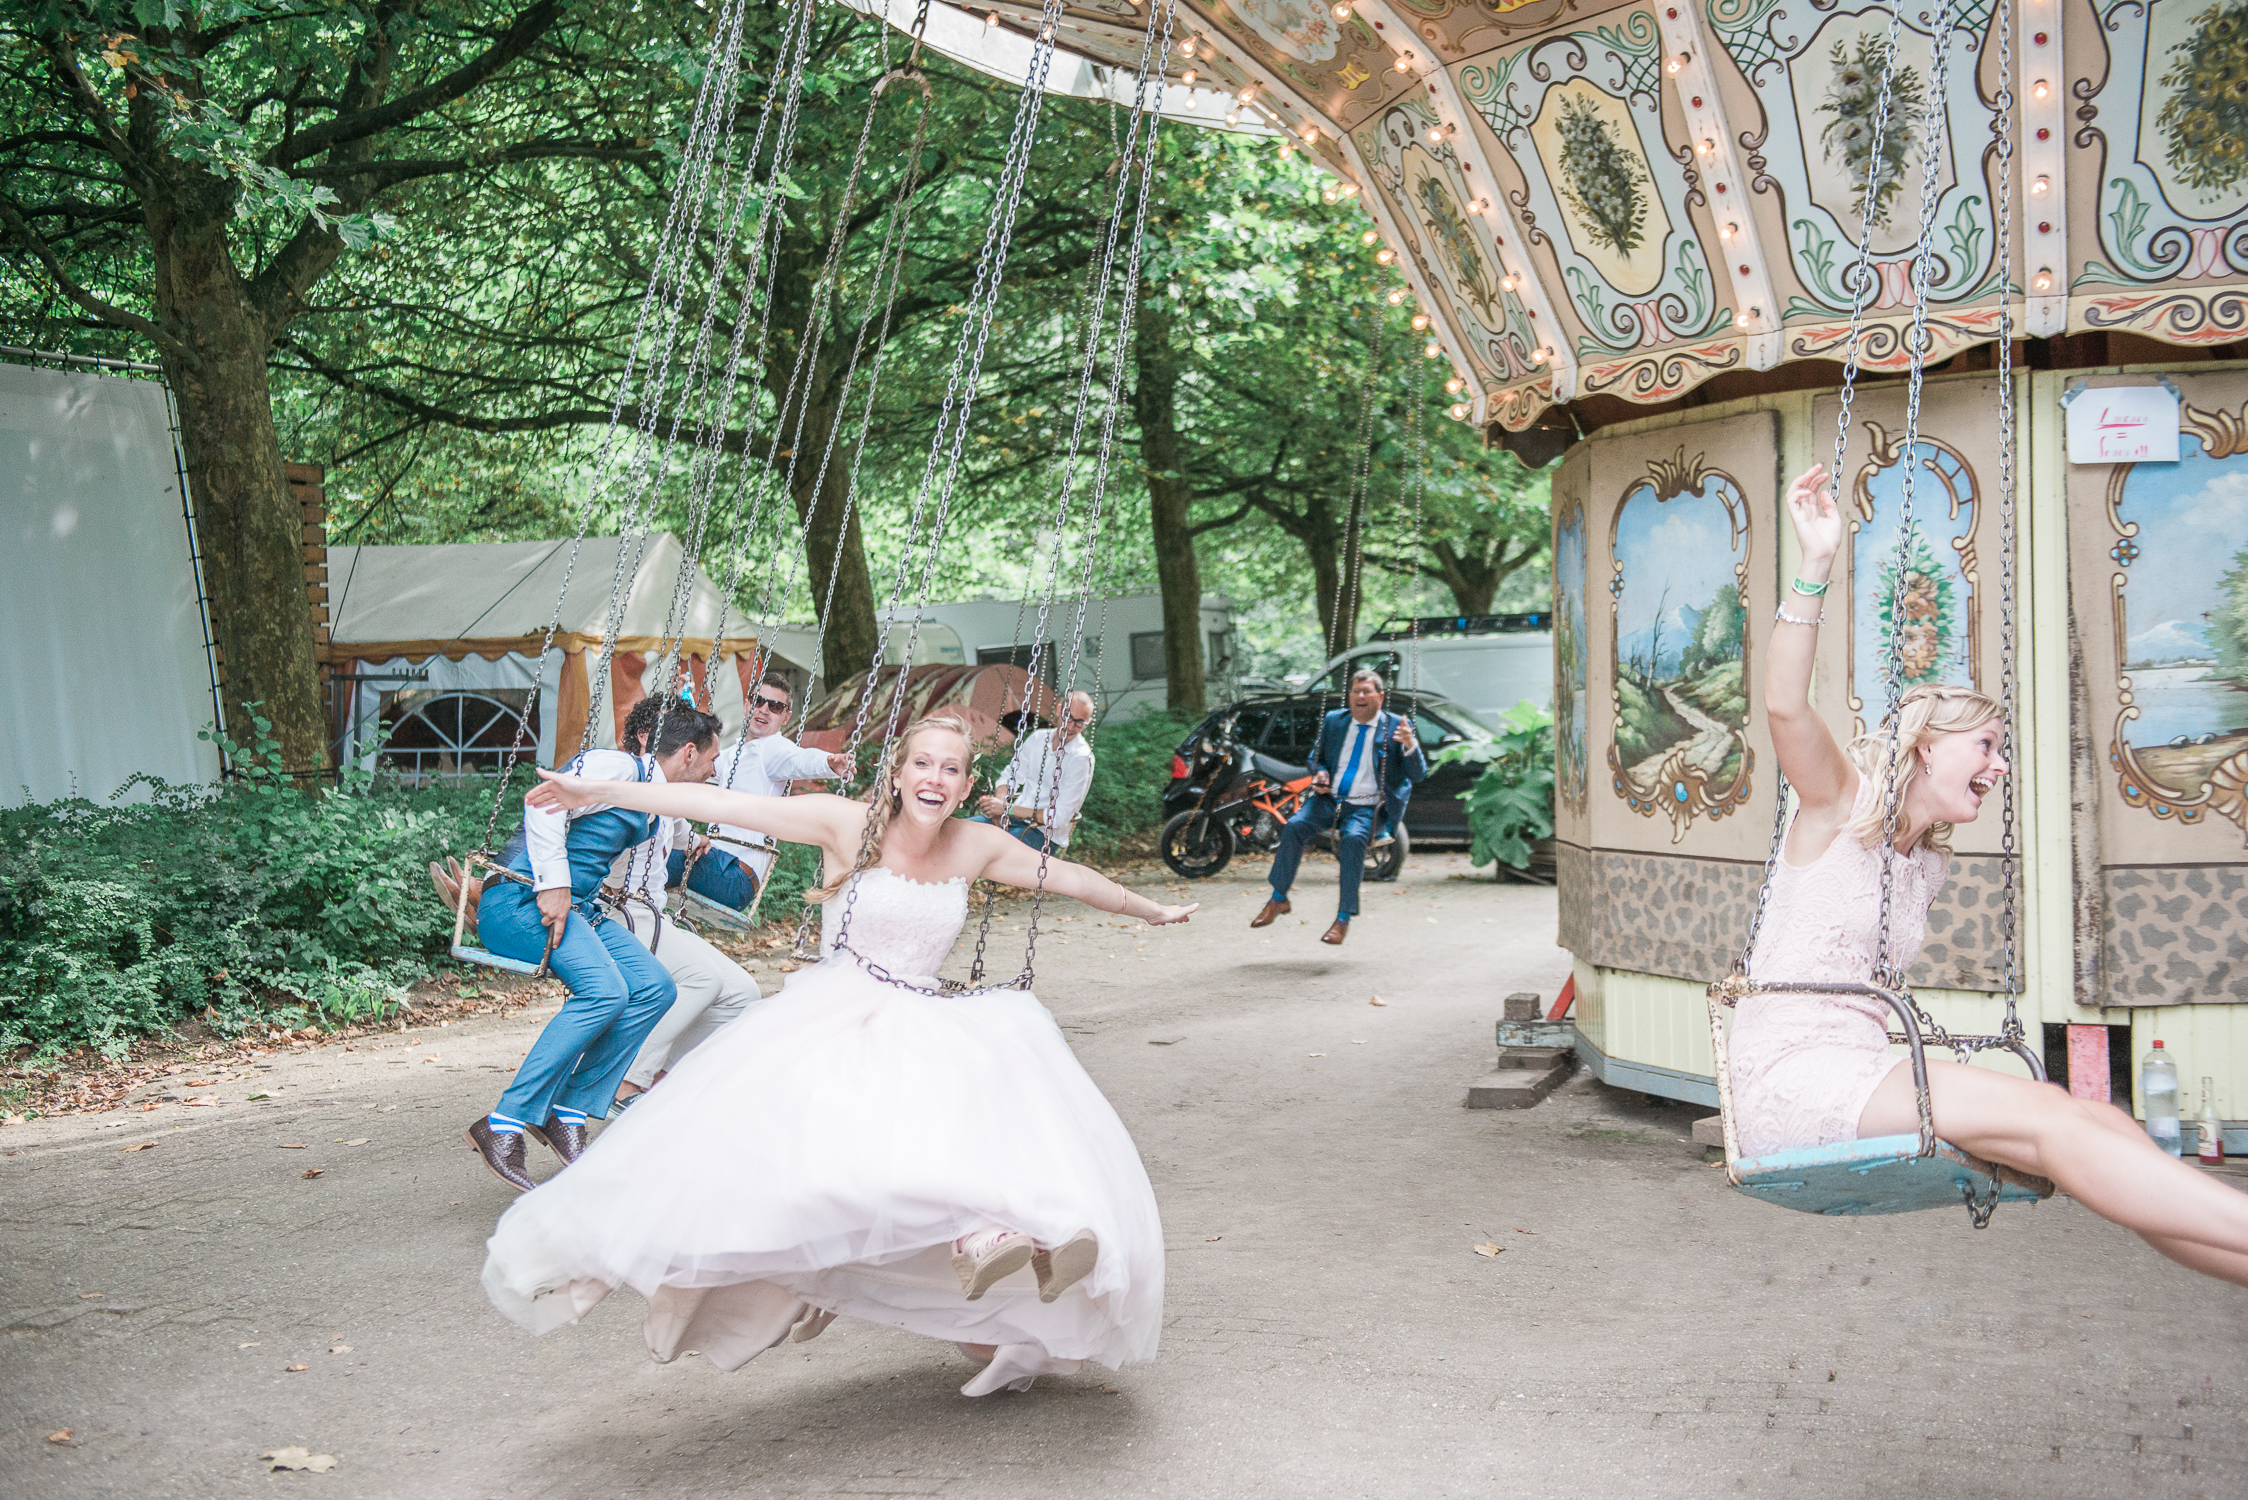 Trouwfotograaf in Wenen - Bride in a carousel at a wedding in the hague